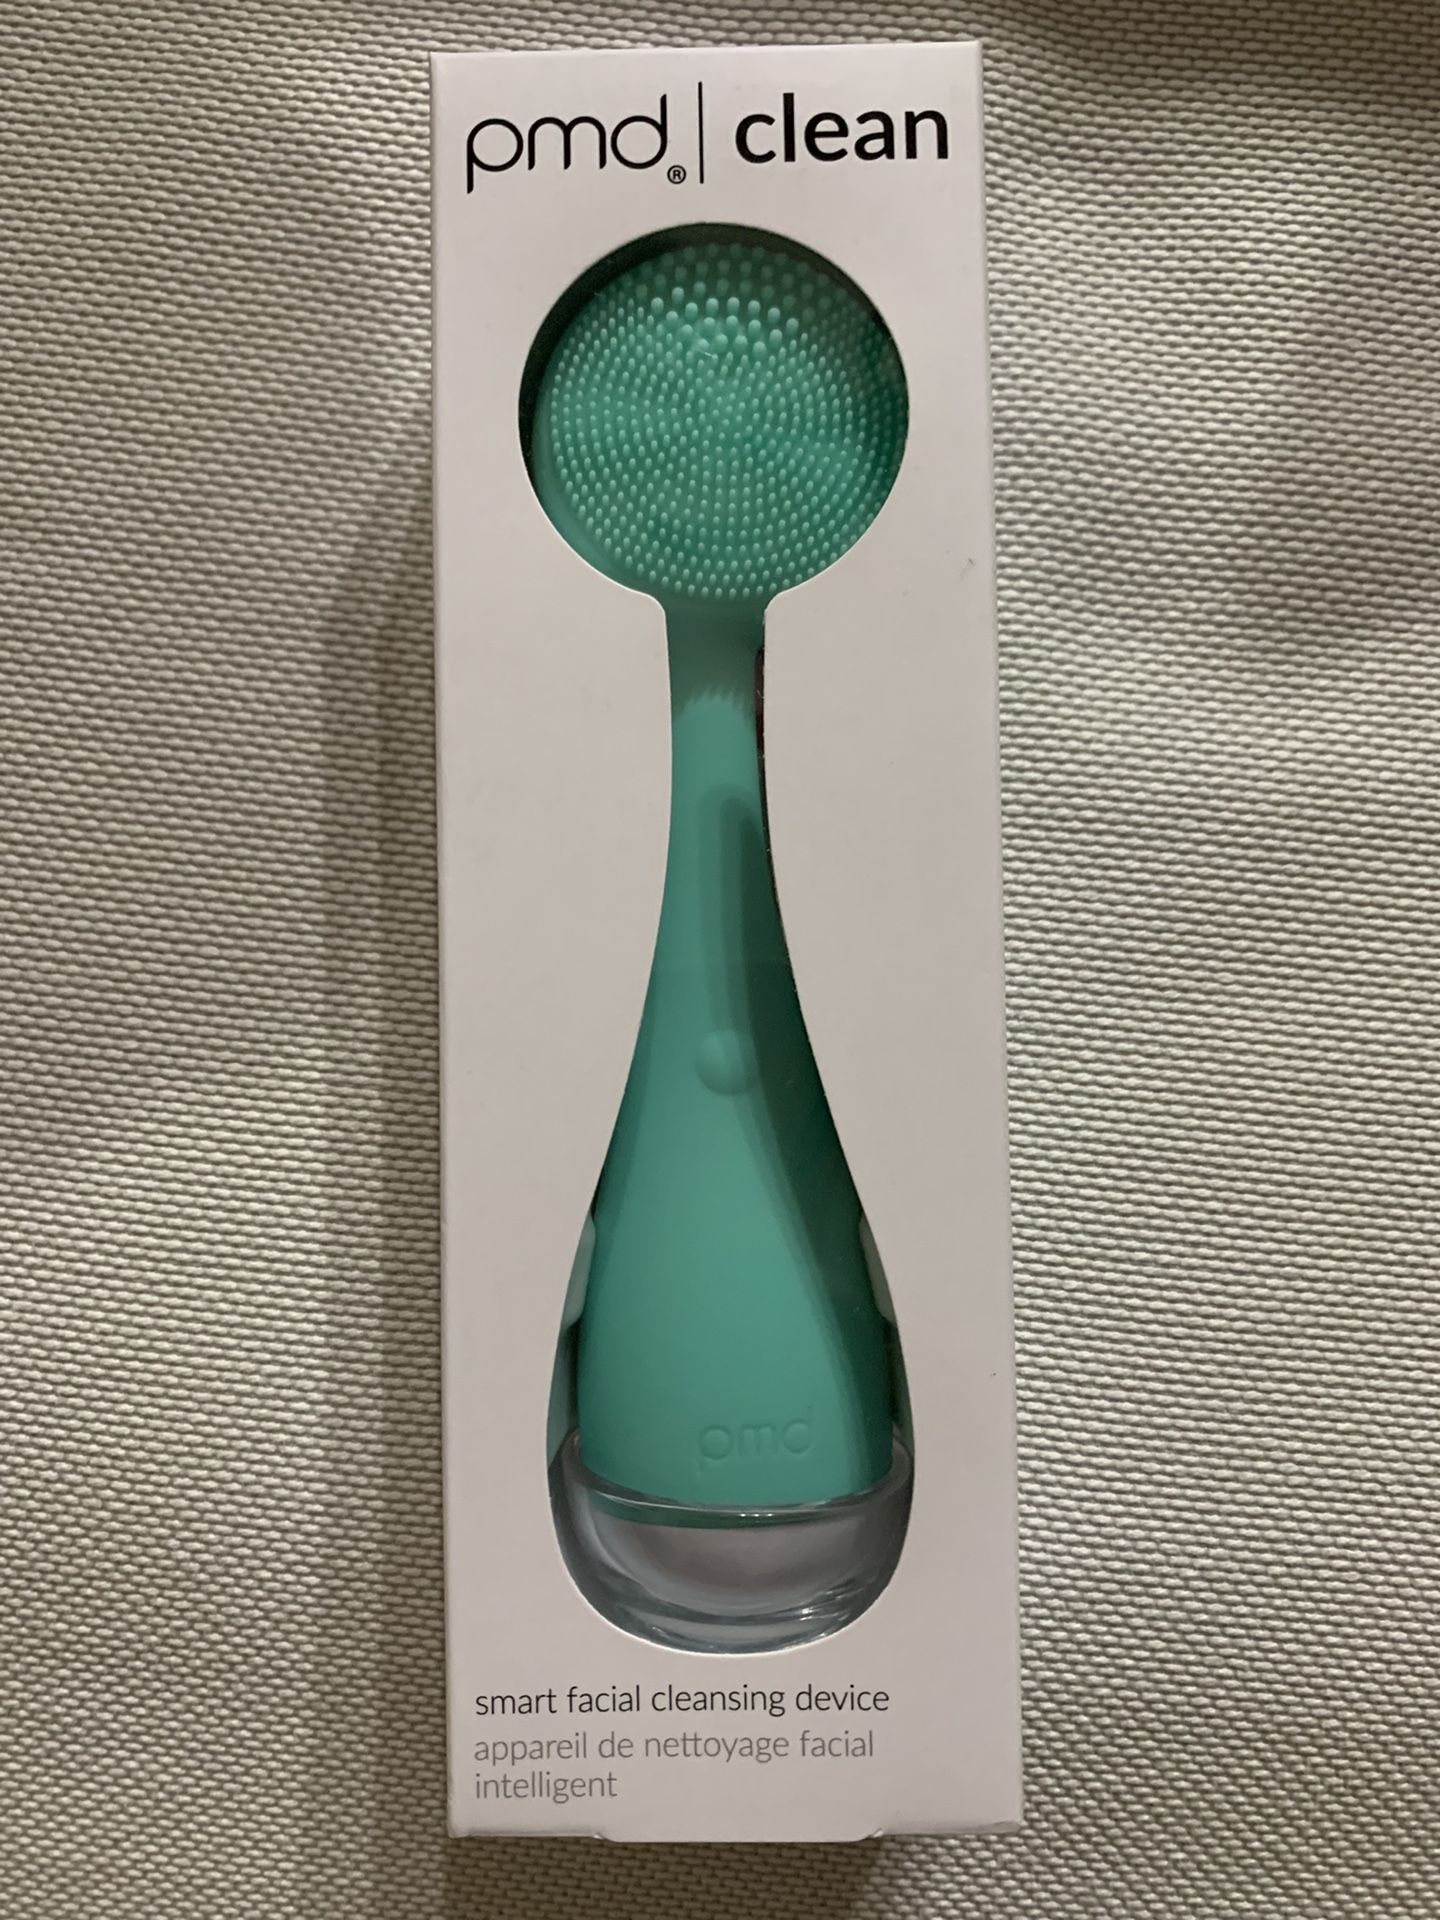 pmd clean smart facial cleansing device